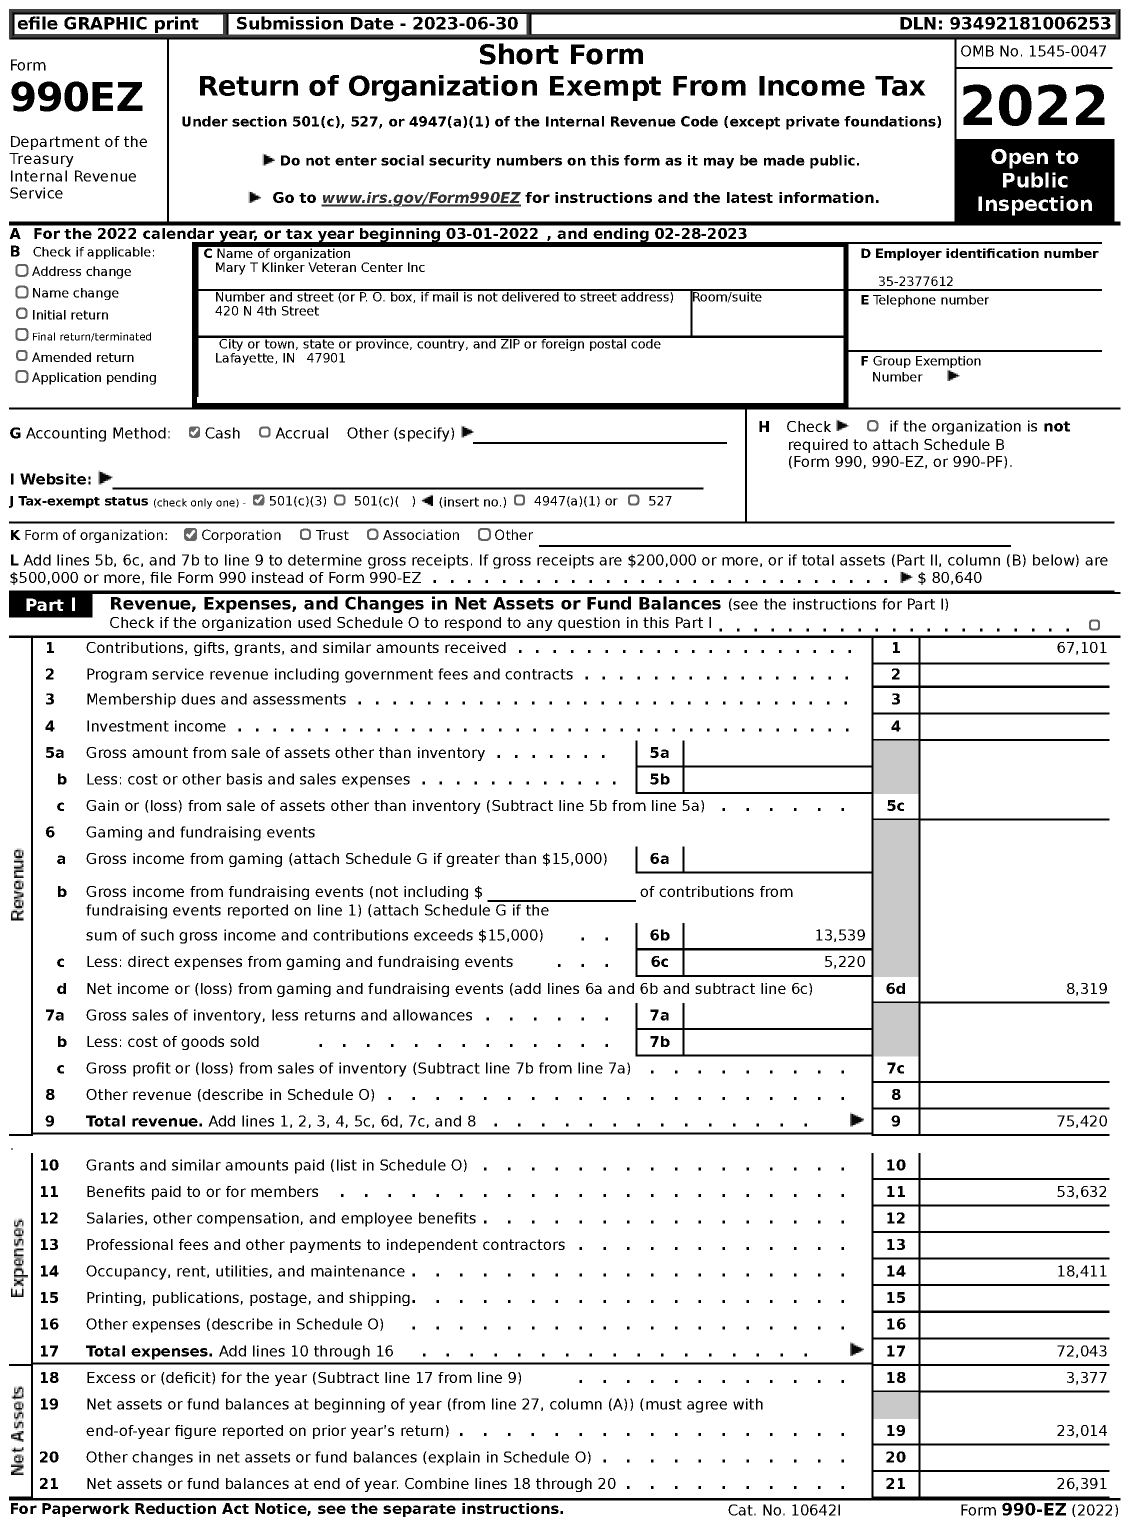 Image of first page of 2022 Form 990EZ for Mary T Klinker Veteran Center